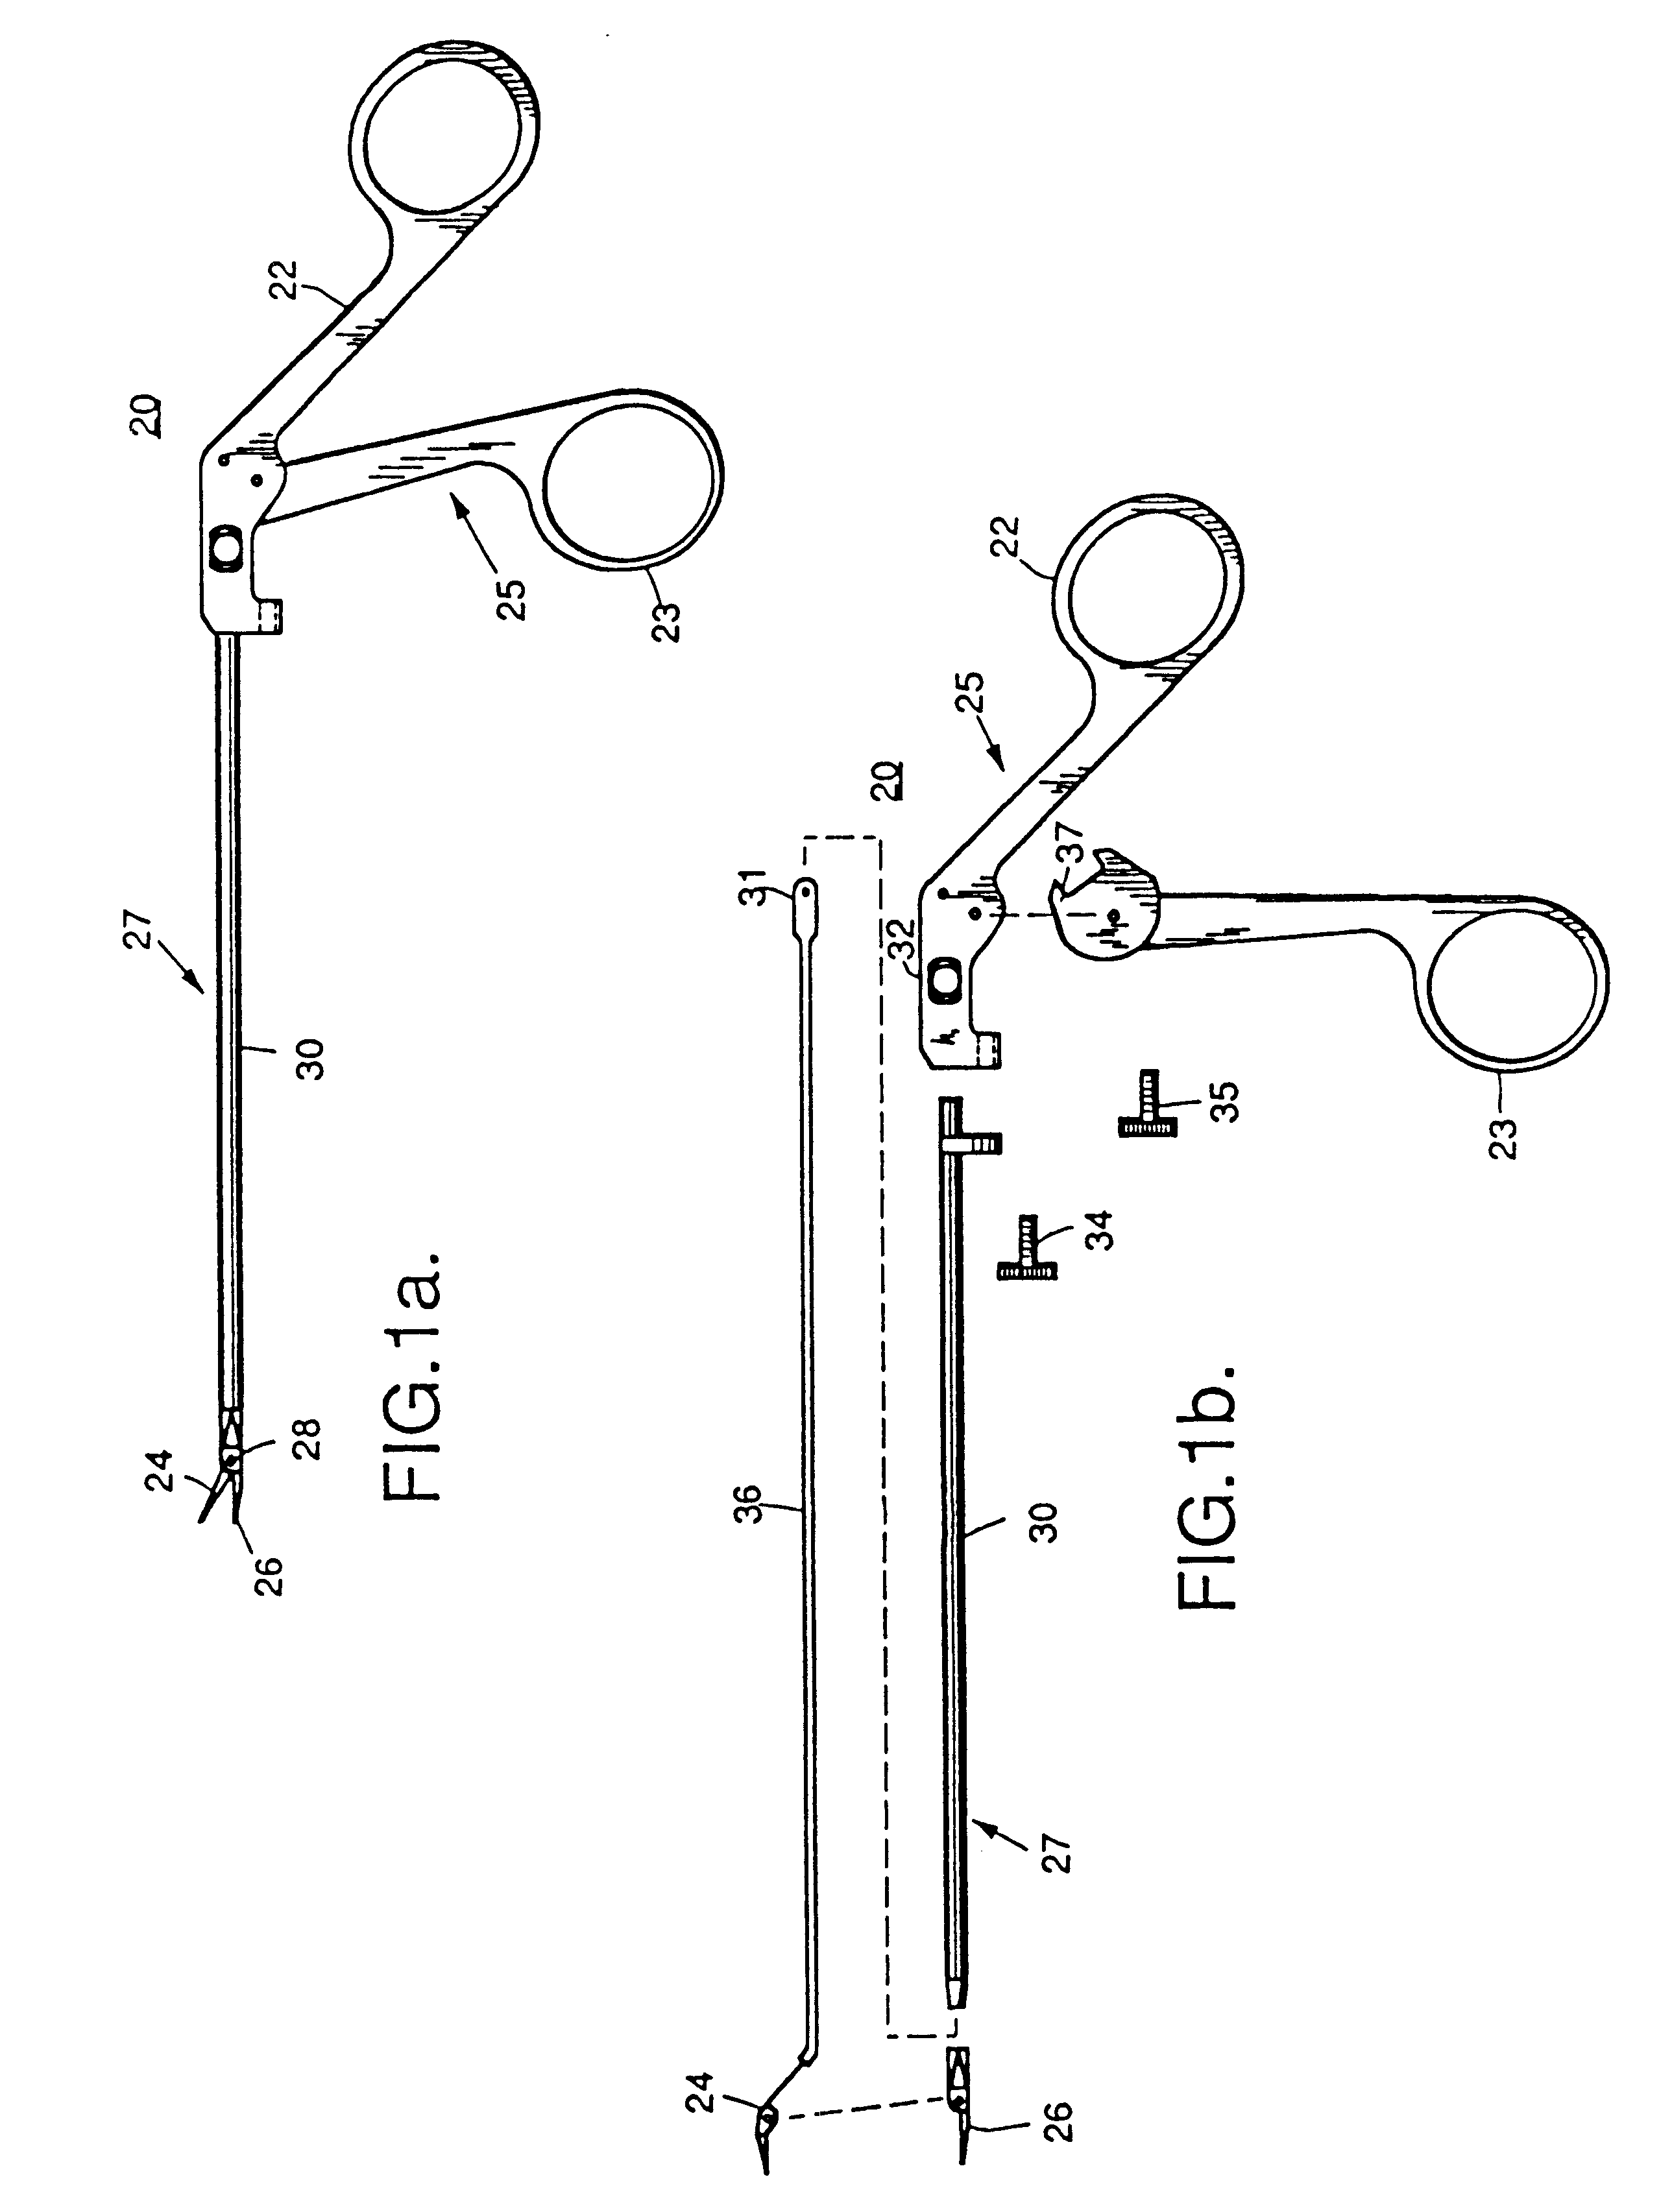 Devices for investing within ligaments for retracting and reinforcing the same